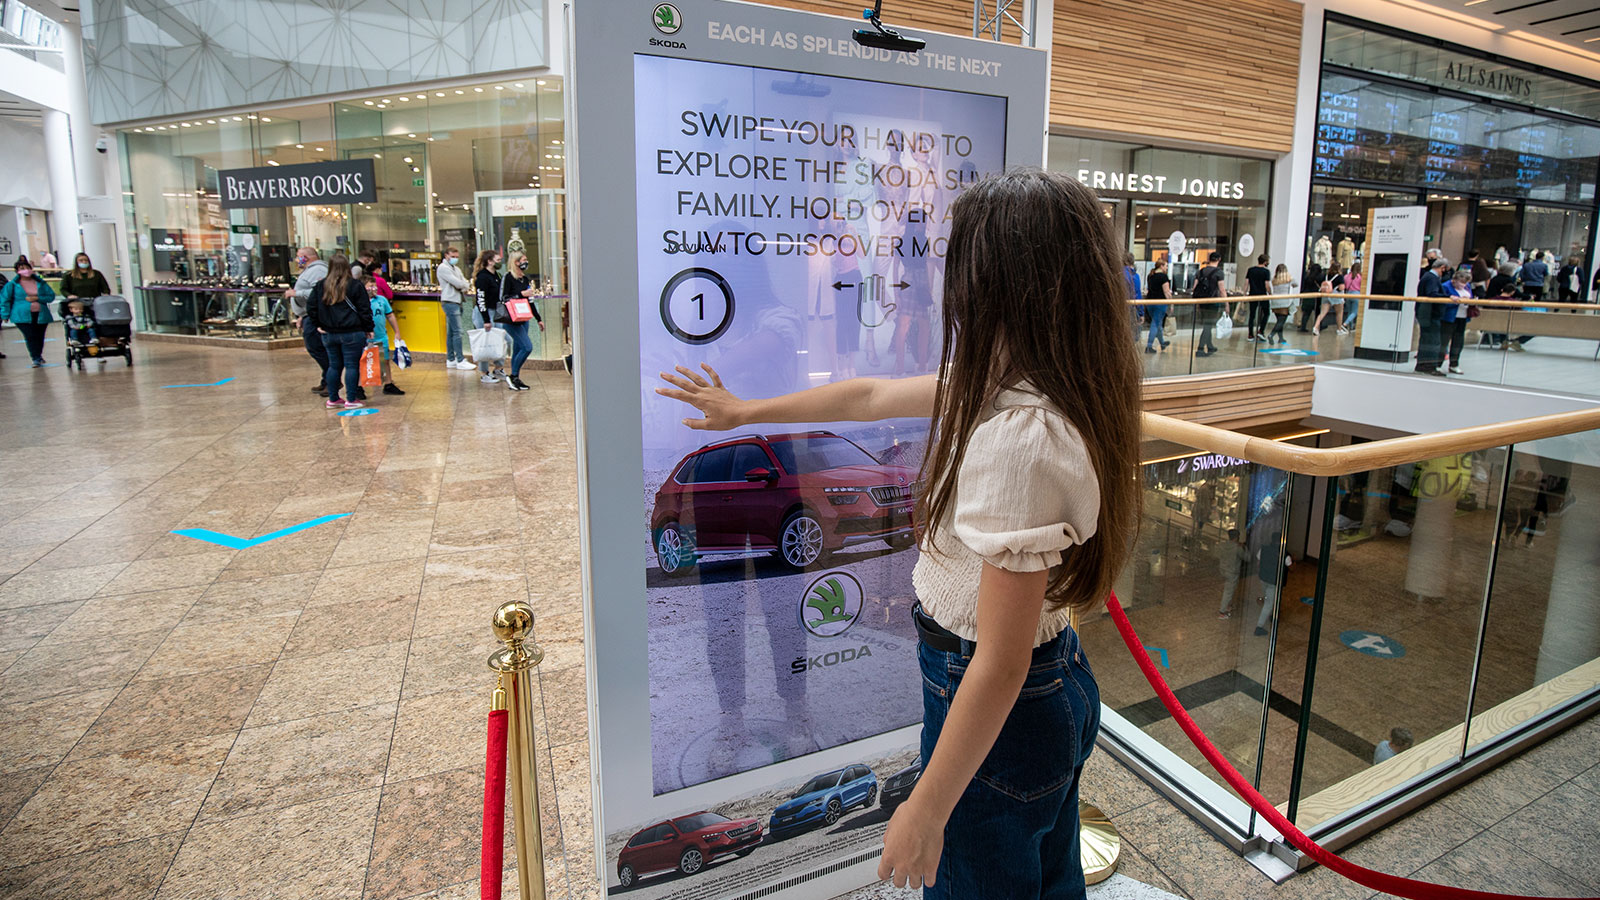 Skoda interactive digital out-of-home advertising screen with Ultraleap touchless technology